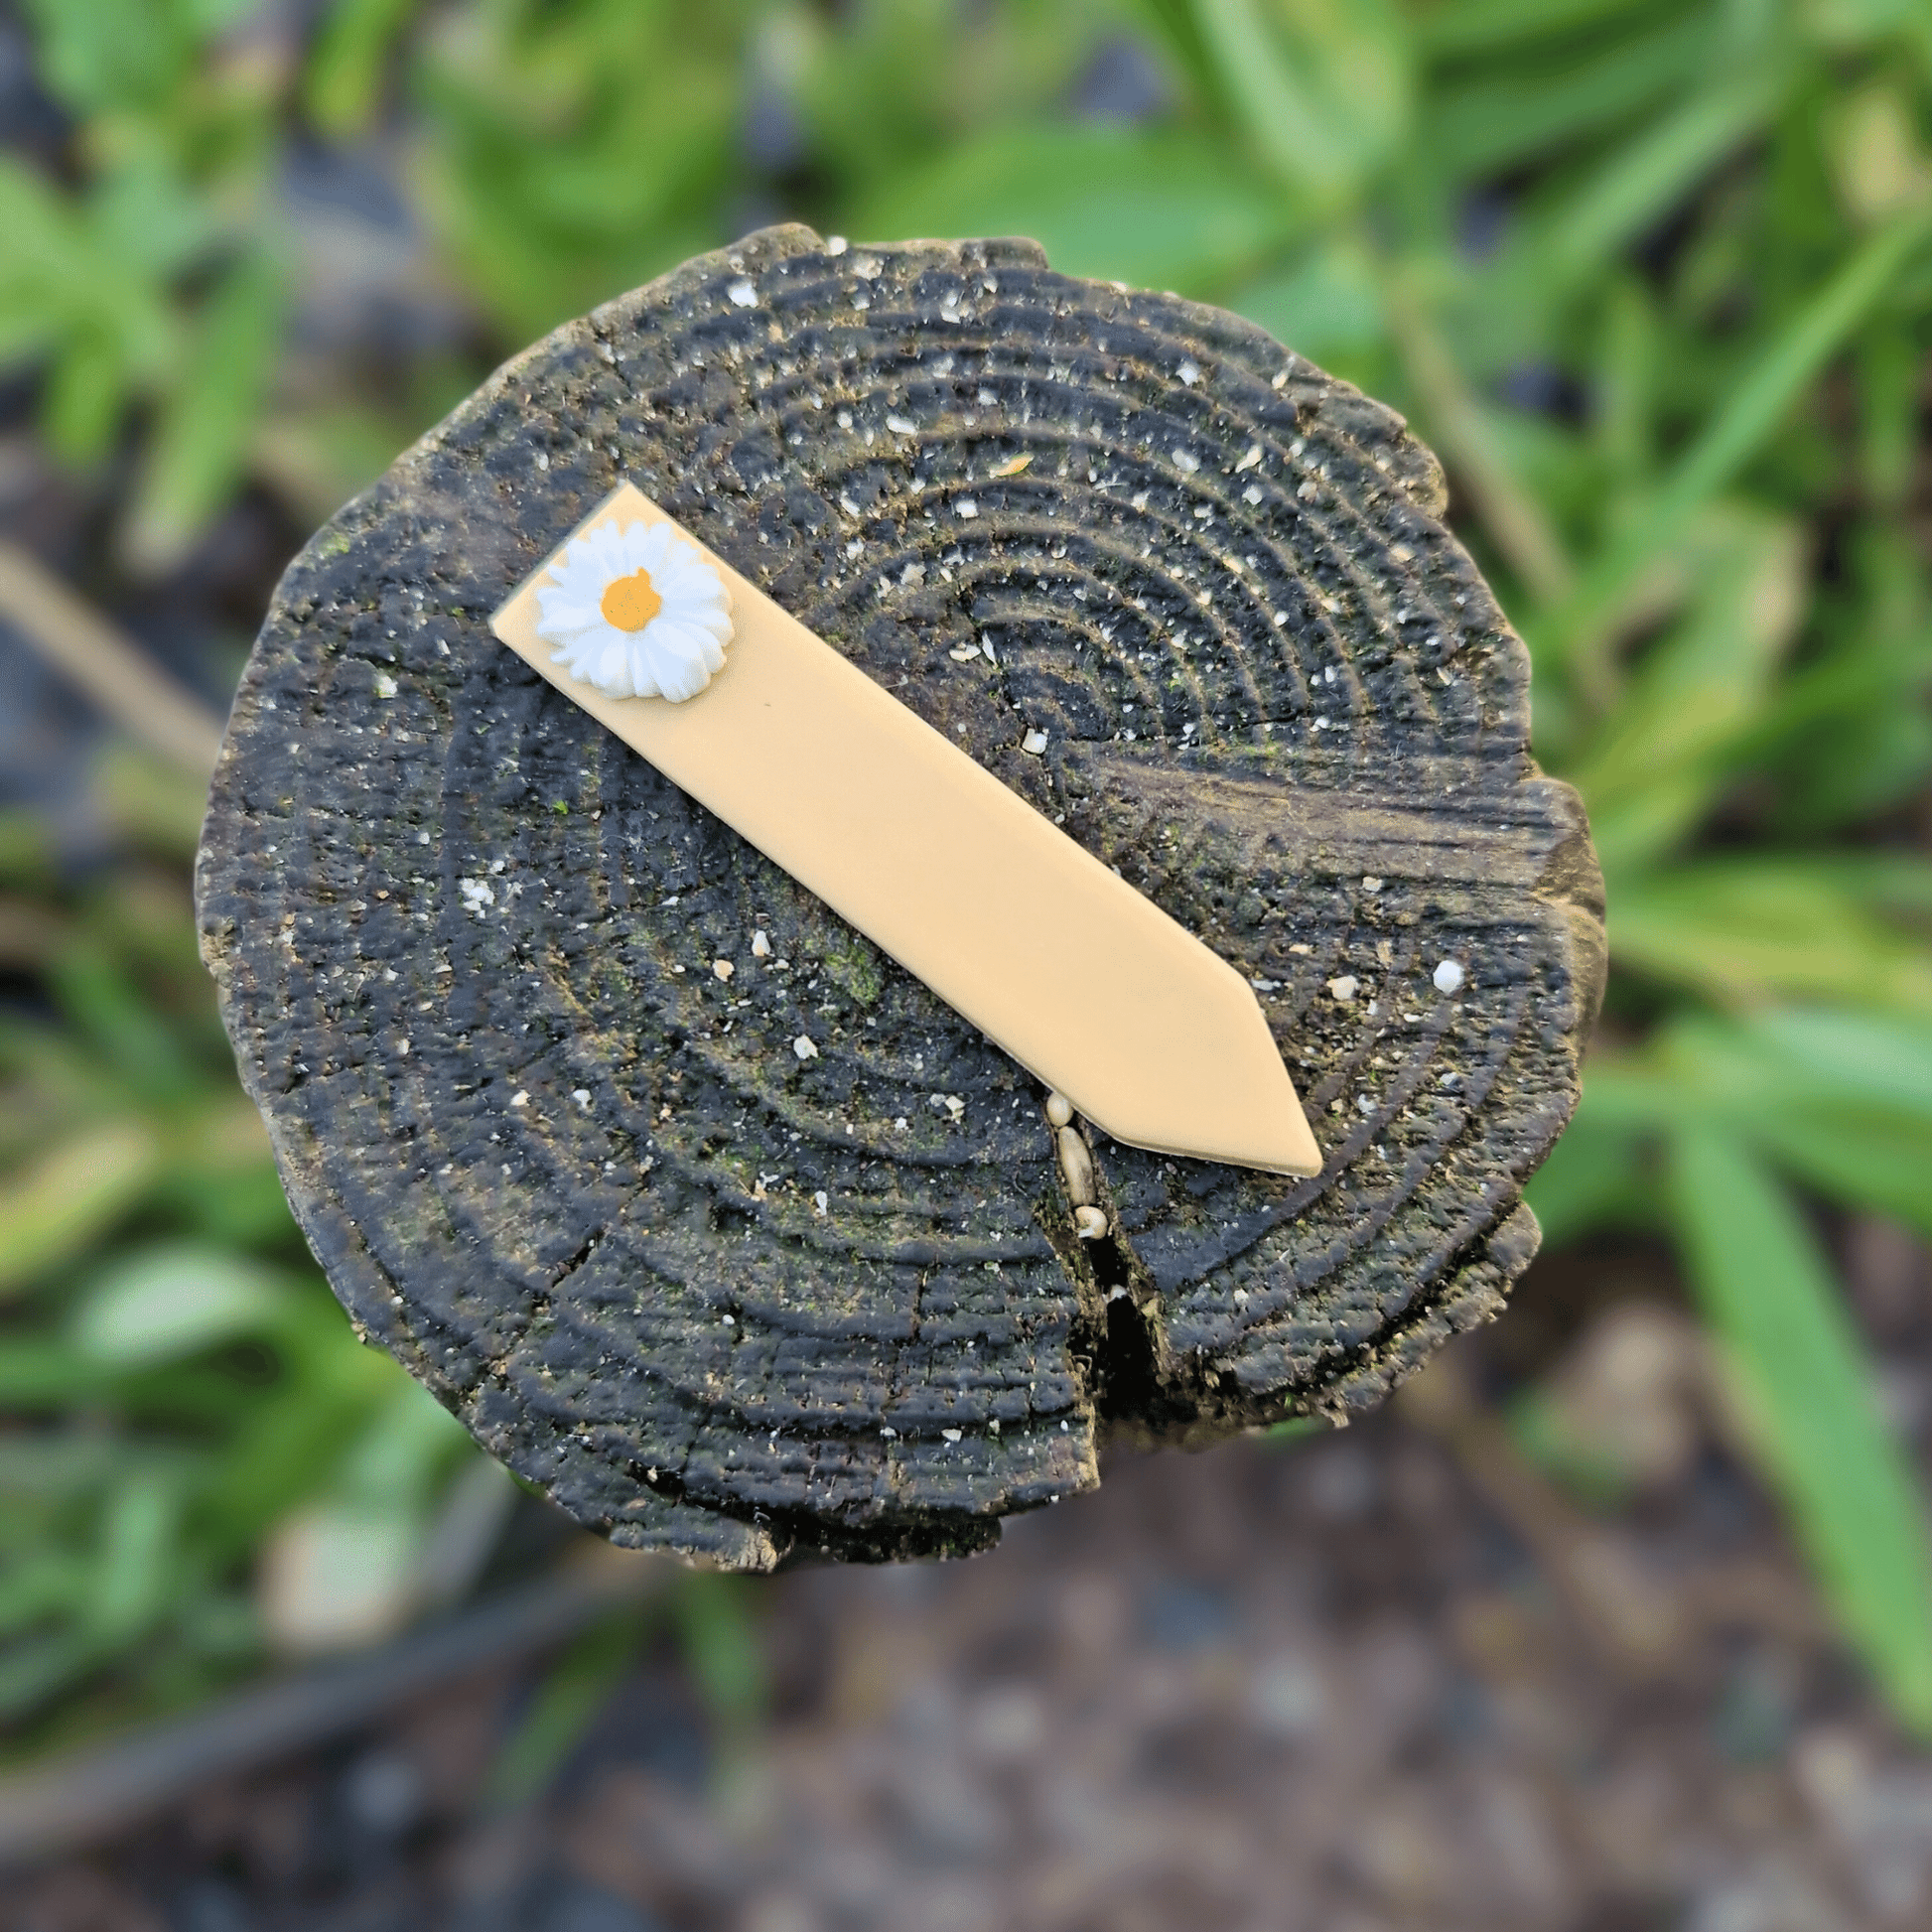 Polymer Clay Decorative Daisy Plant Tag on Wooden Post in Nature.